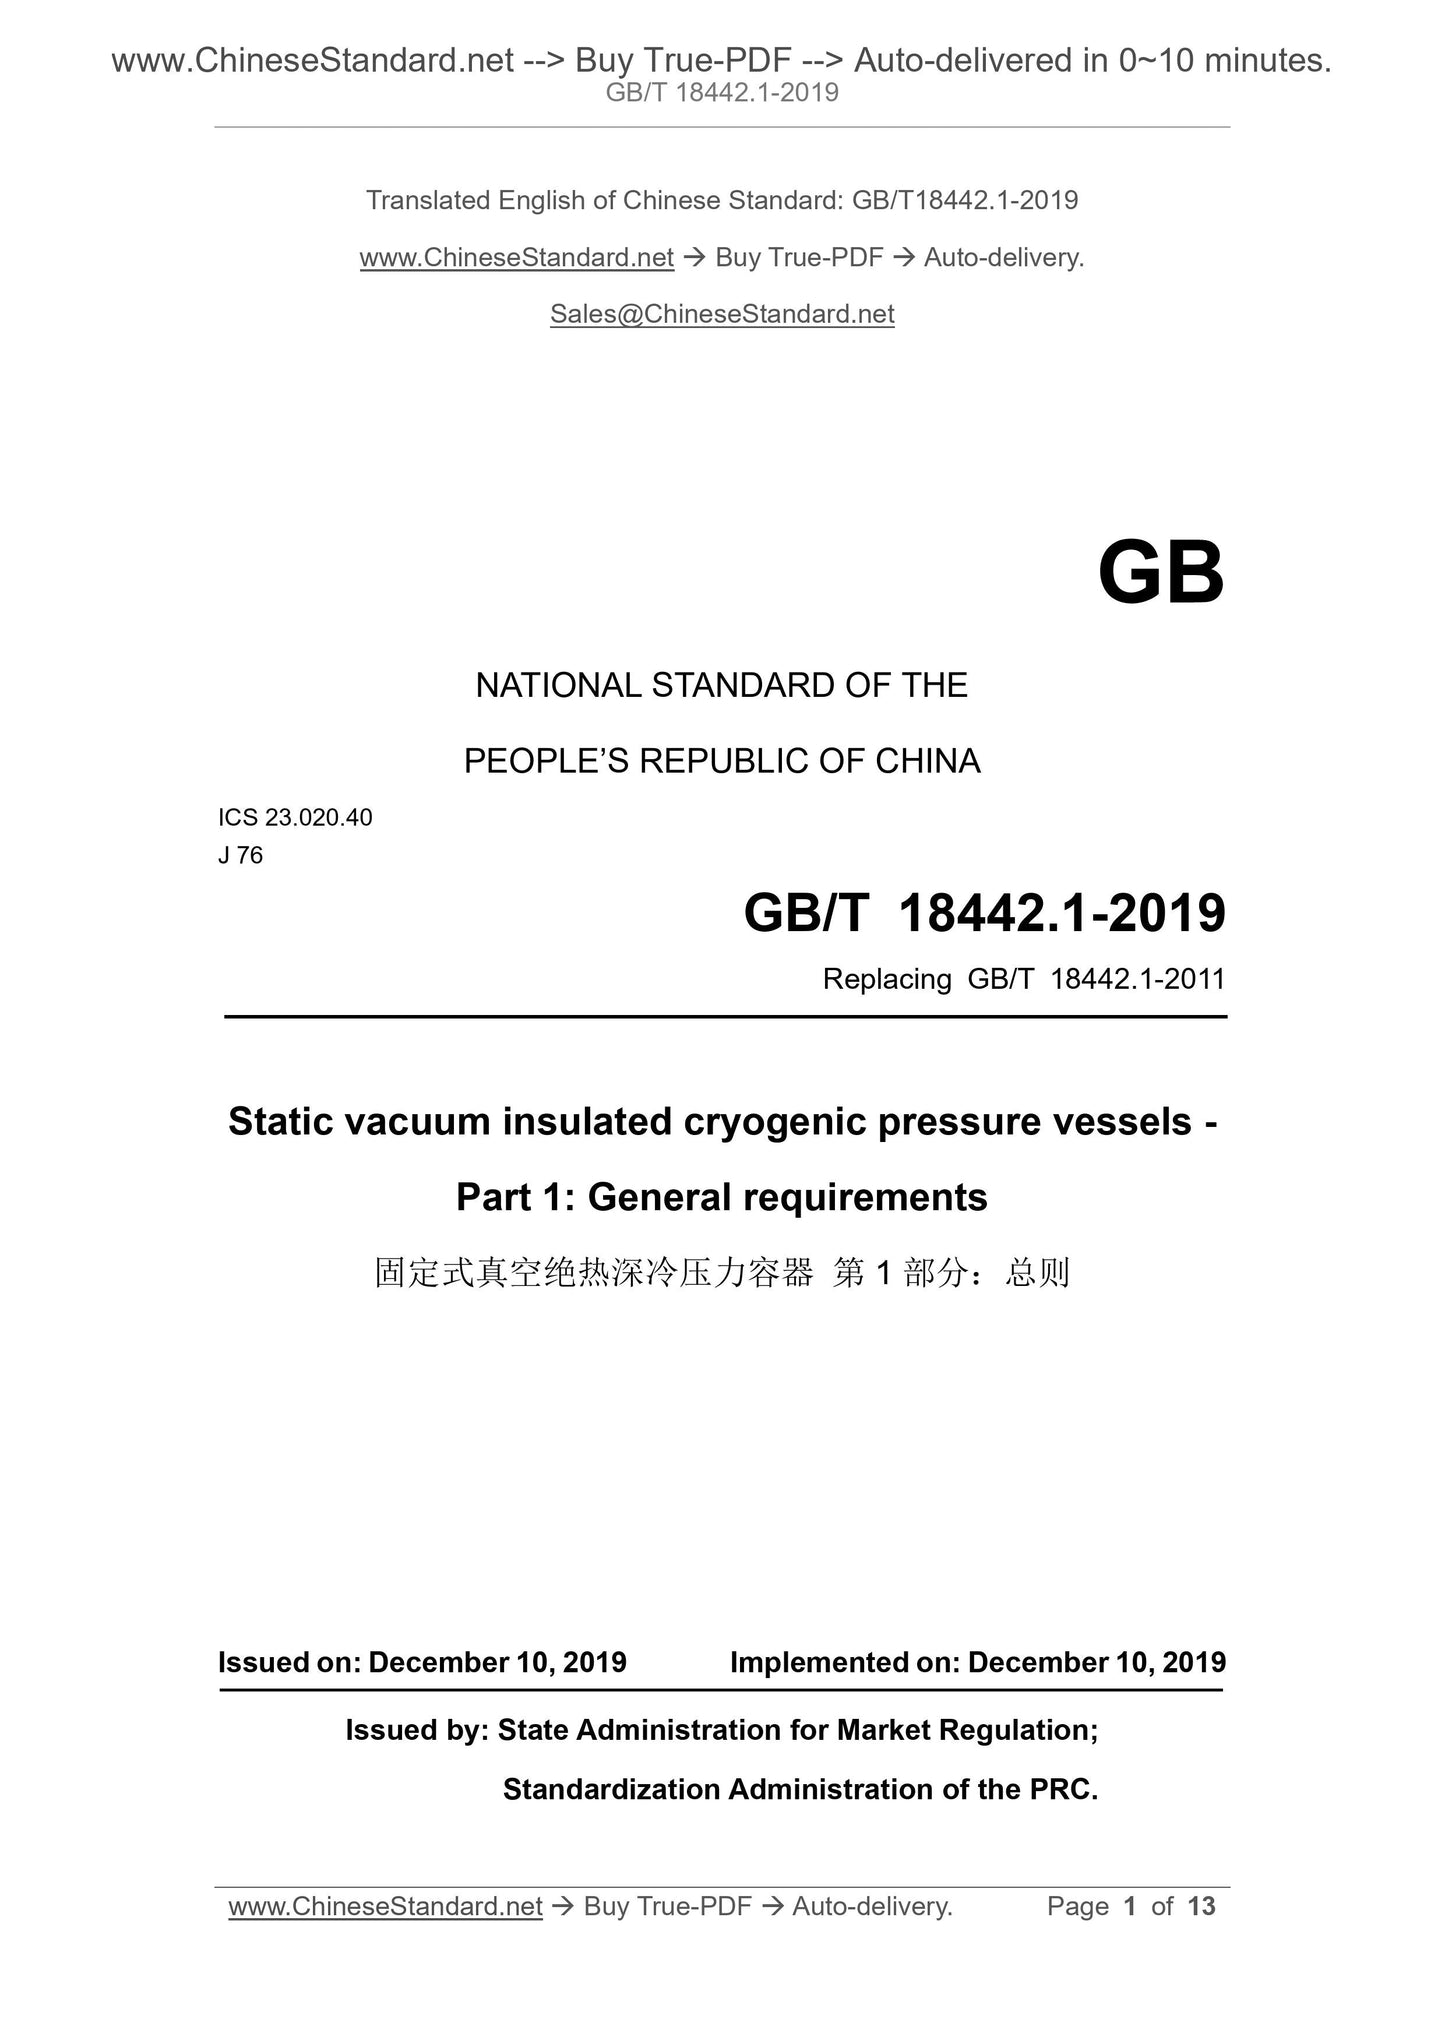 GB/T 18442.1-2019 Page 1